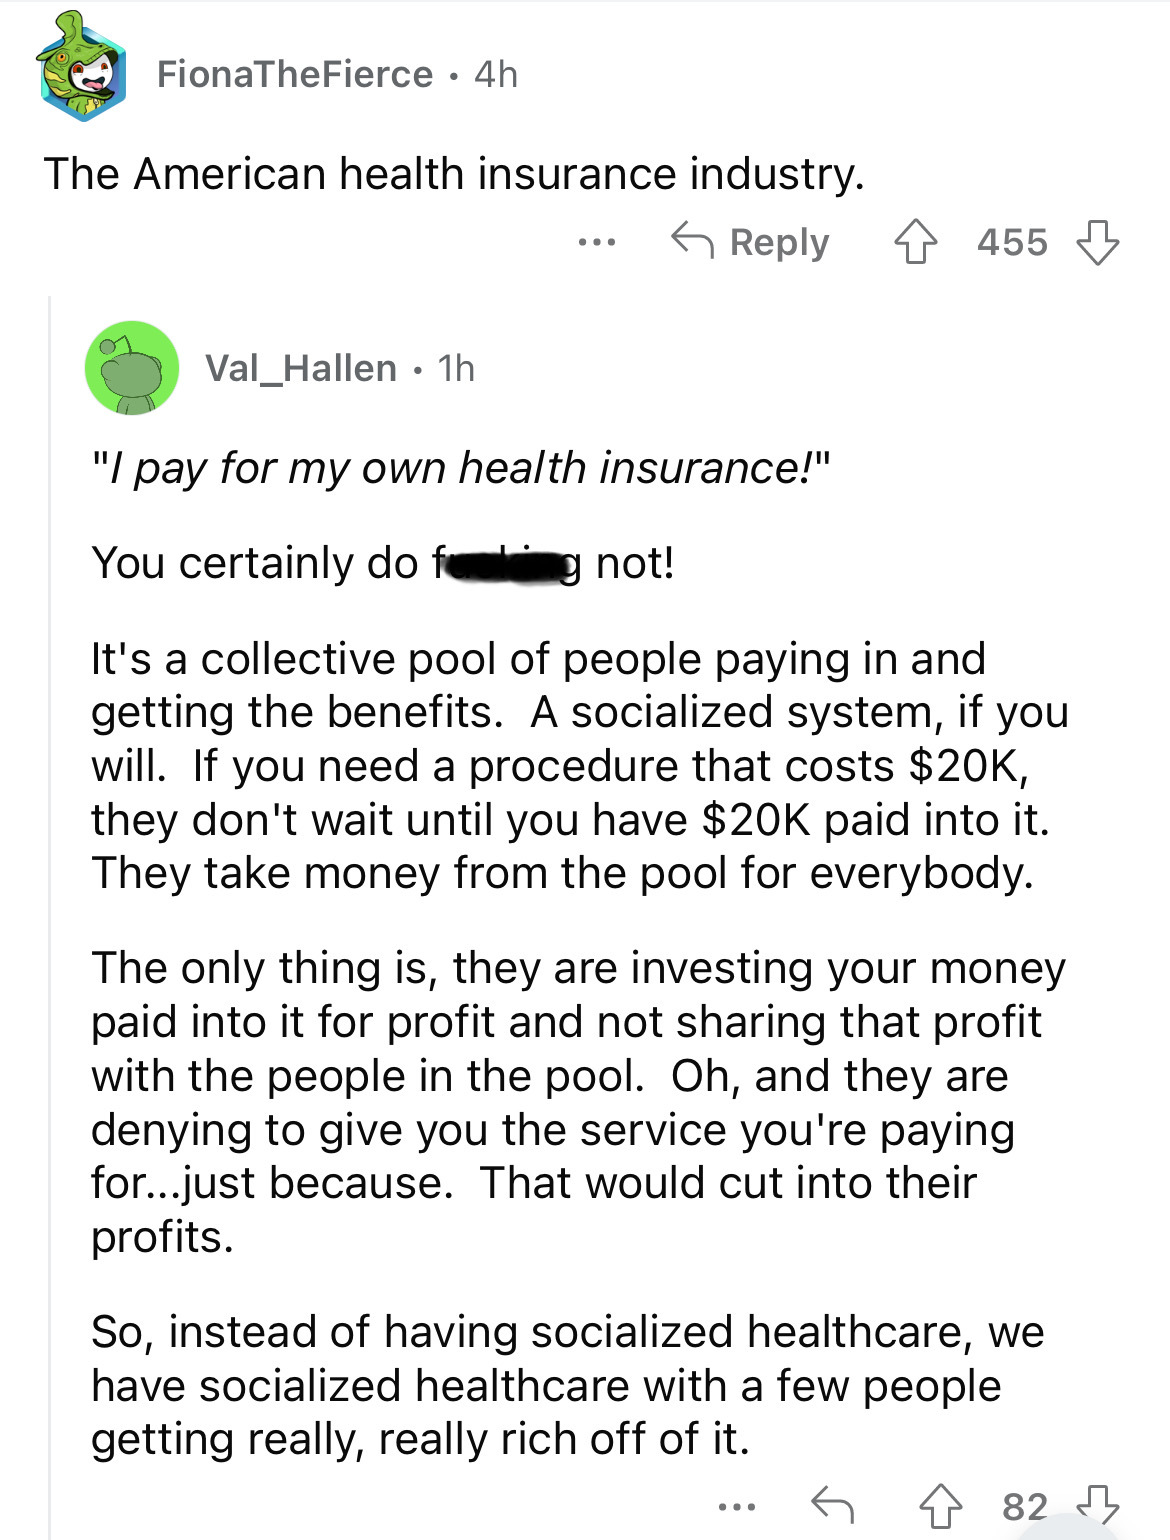 document - FionaTheFierce 4h The American health insurance industry. Val_Hallen 1h ... 455 "I pay for my own health insurance!" You certainly do fog not! It's a collective pool of people paying in and getting the benefits. A socialized system, if you will